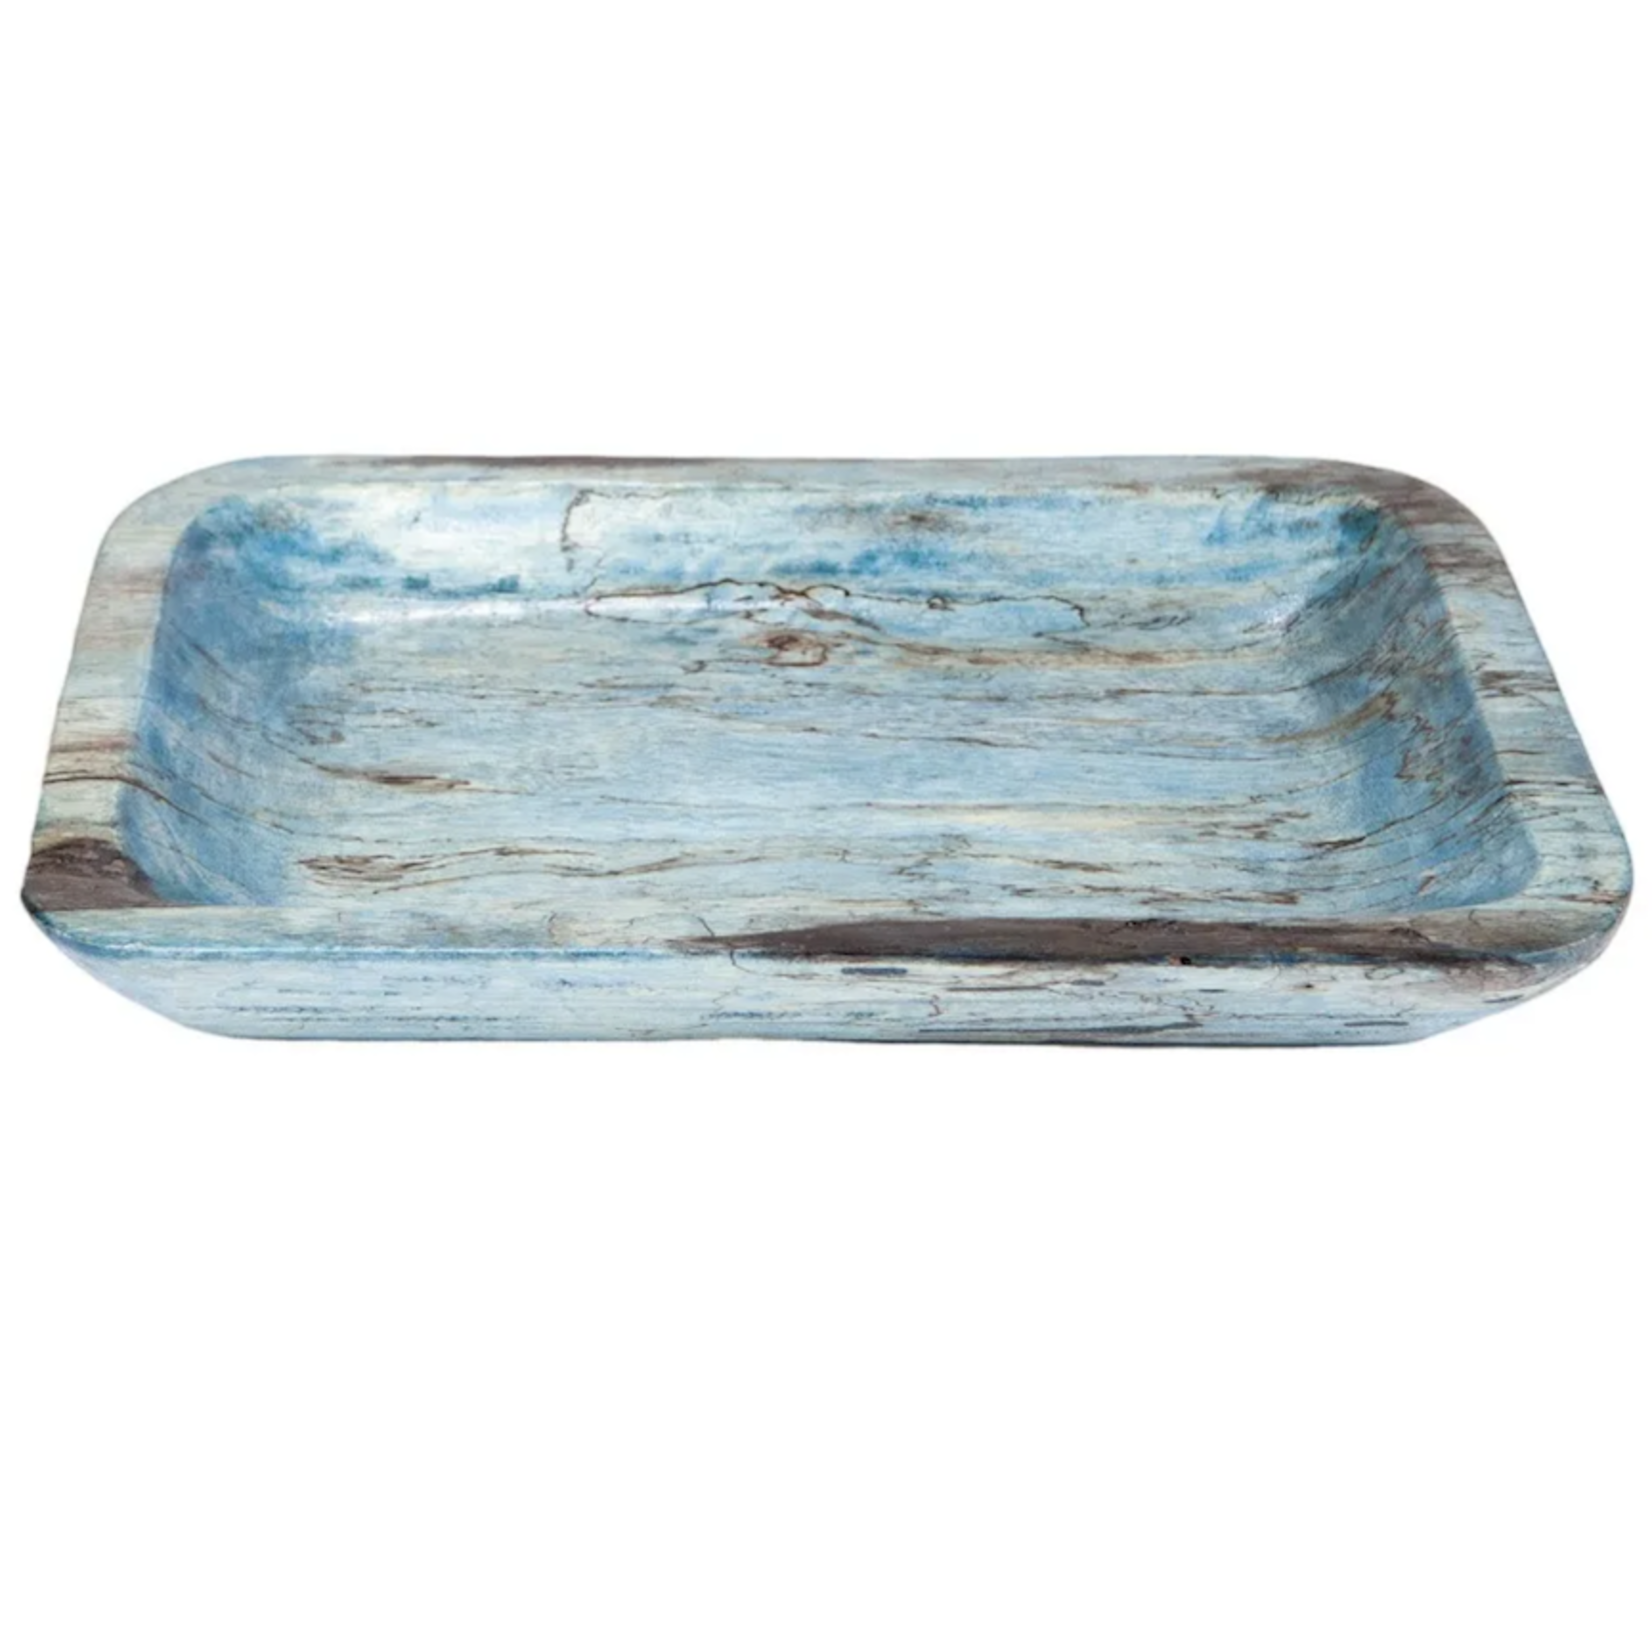 Outside The Box 16x12 Miami Blue Solid Tamarind Wood Tray